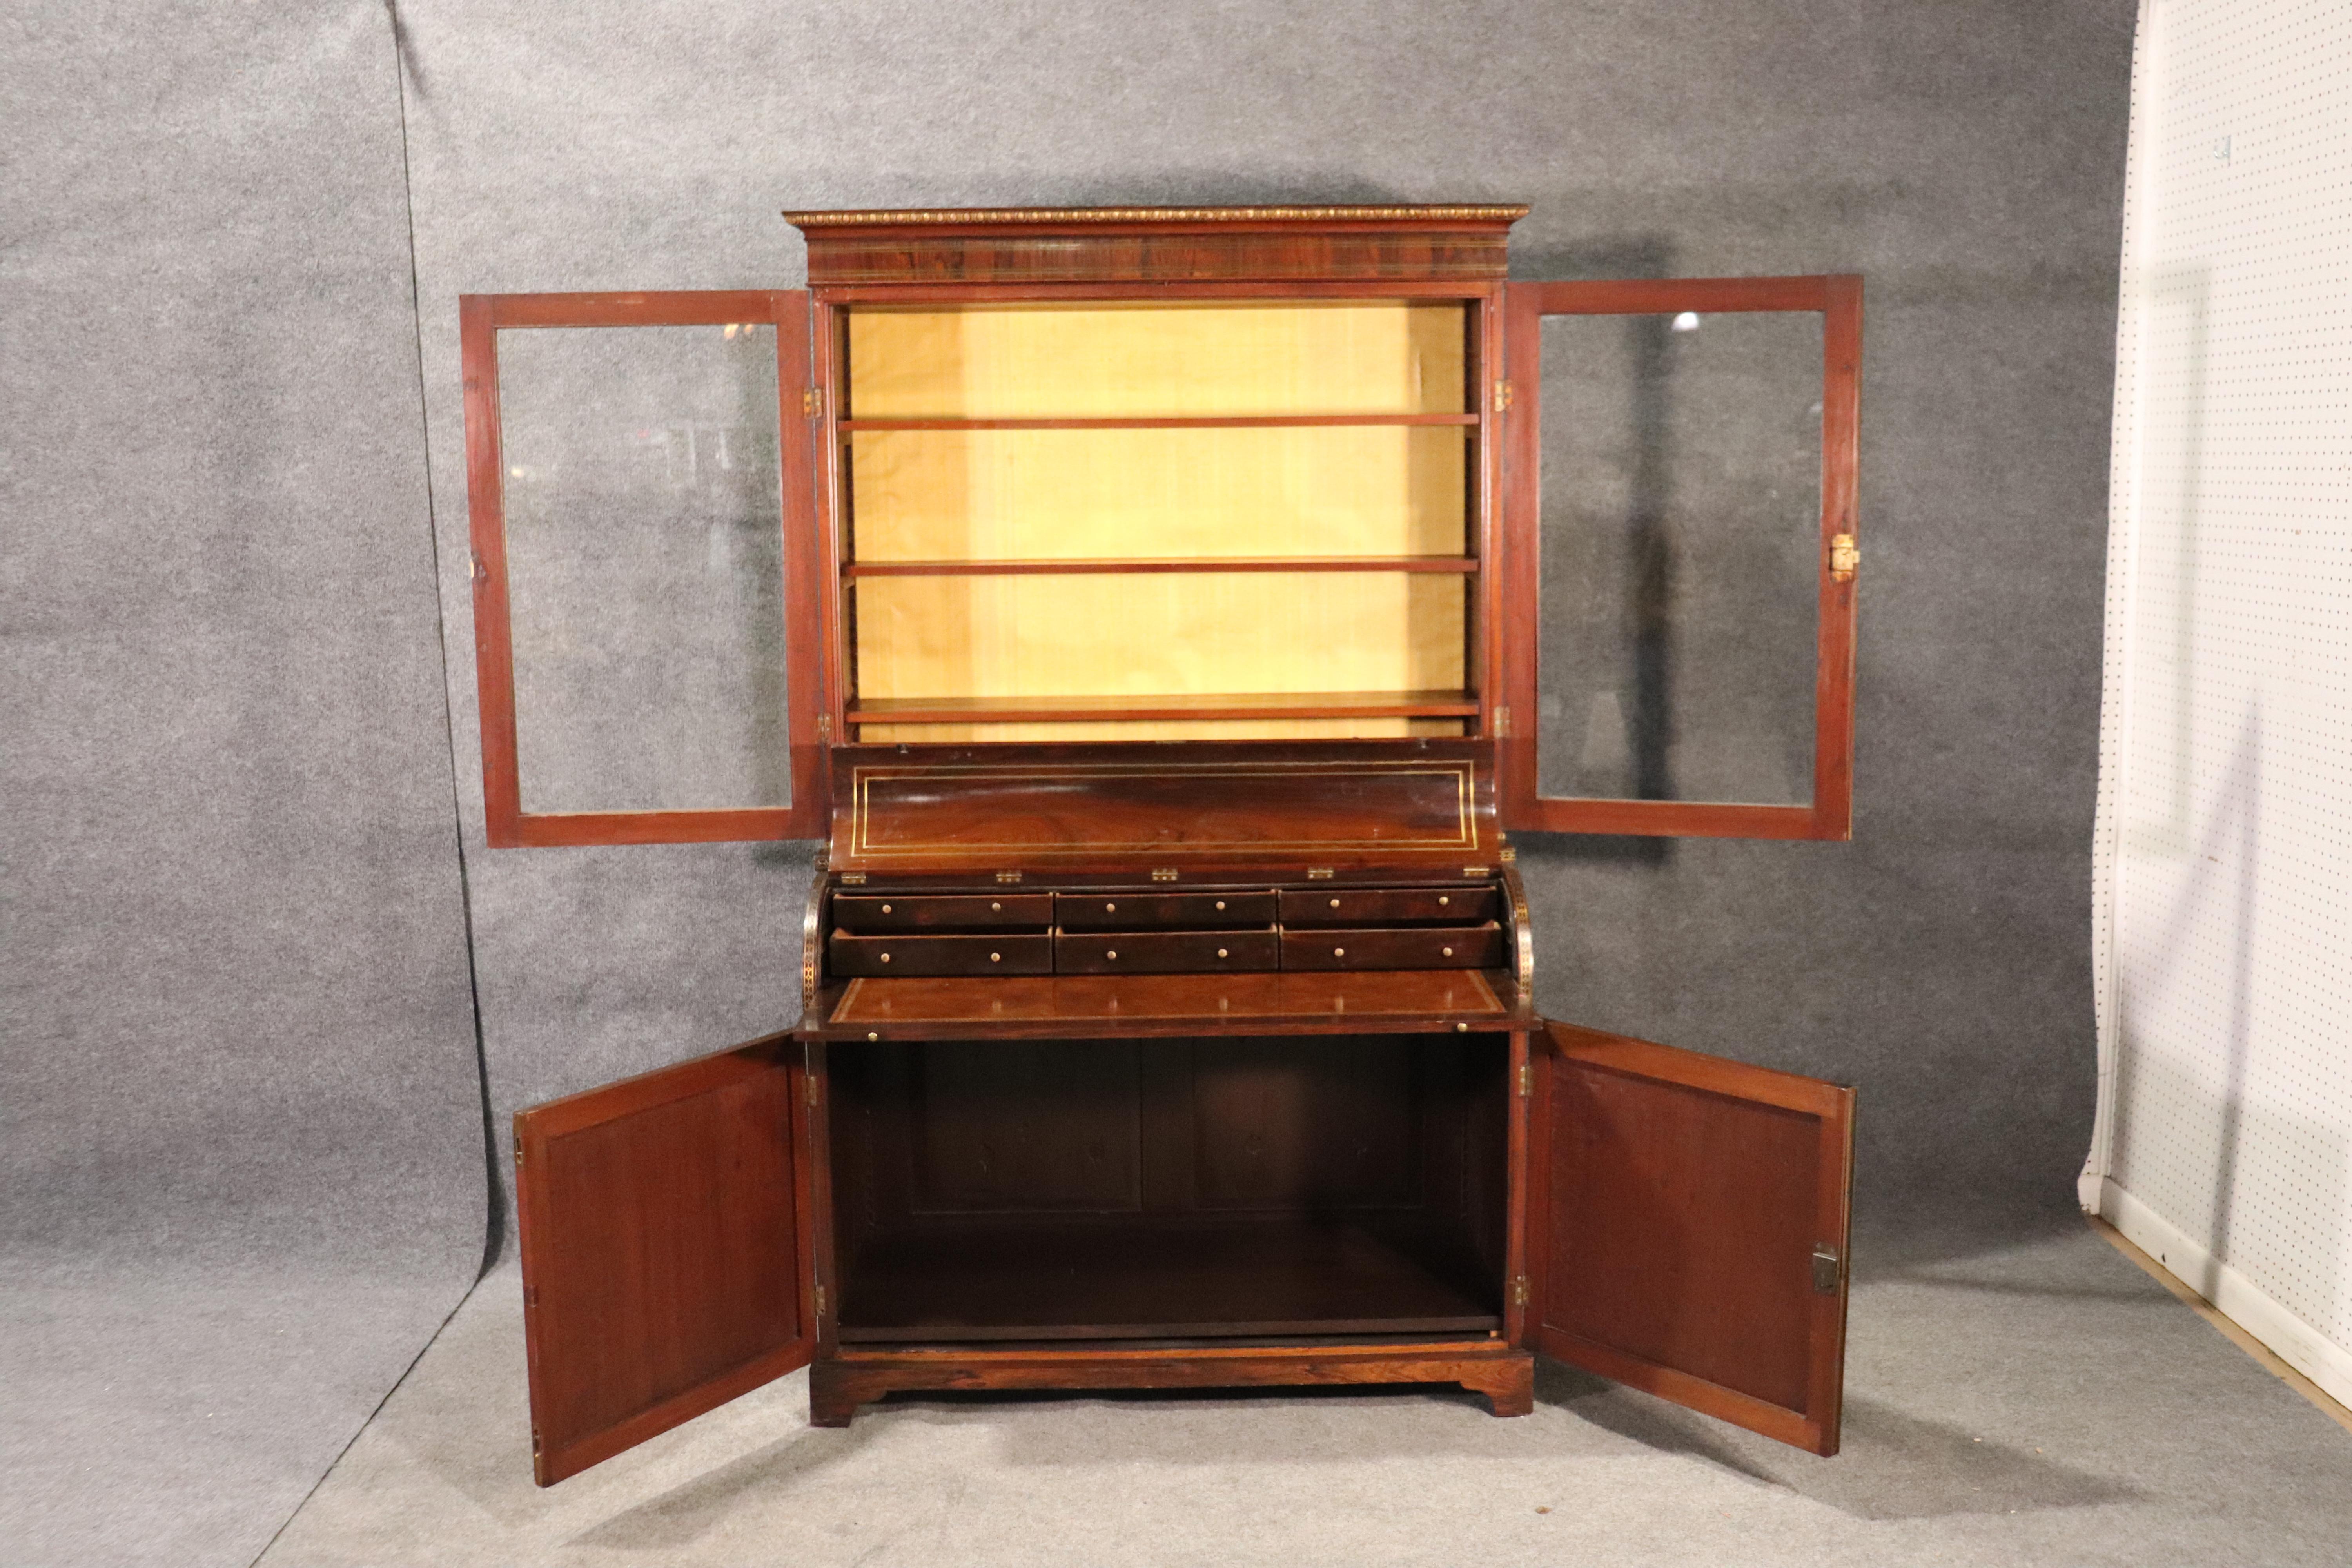 This is a fantastic and very clean 1840s era English Regency desk. Made of rosewood with brass inlay in the style of Andre Boulle, this desk is a handsome addition to you office or livinroom area. The desk features a leather writing surface and is